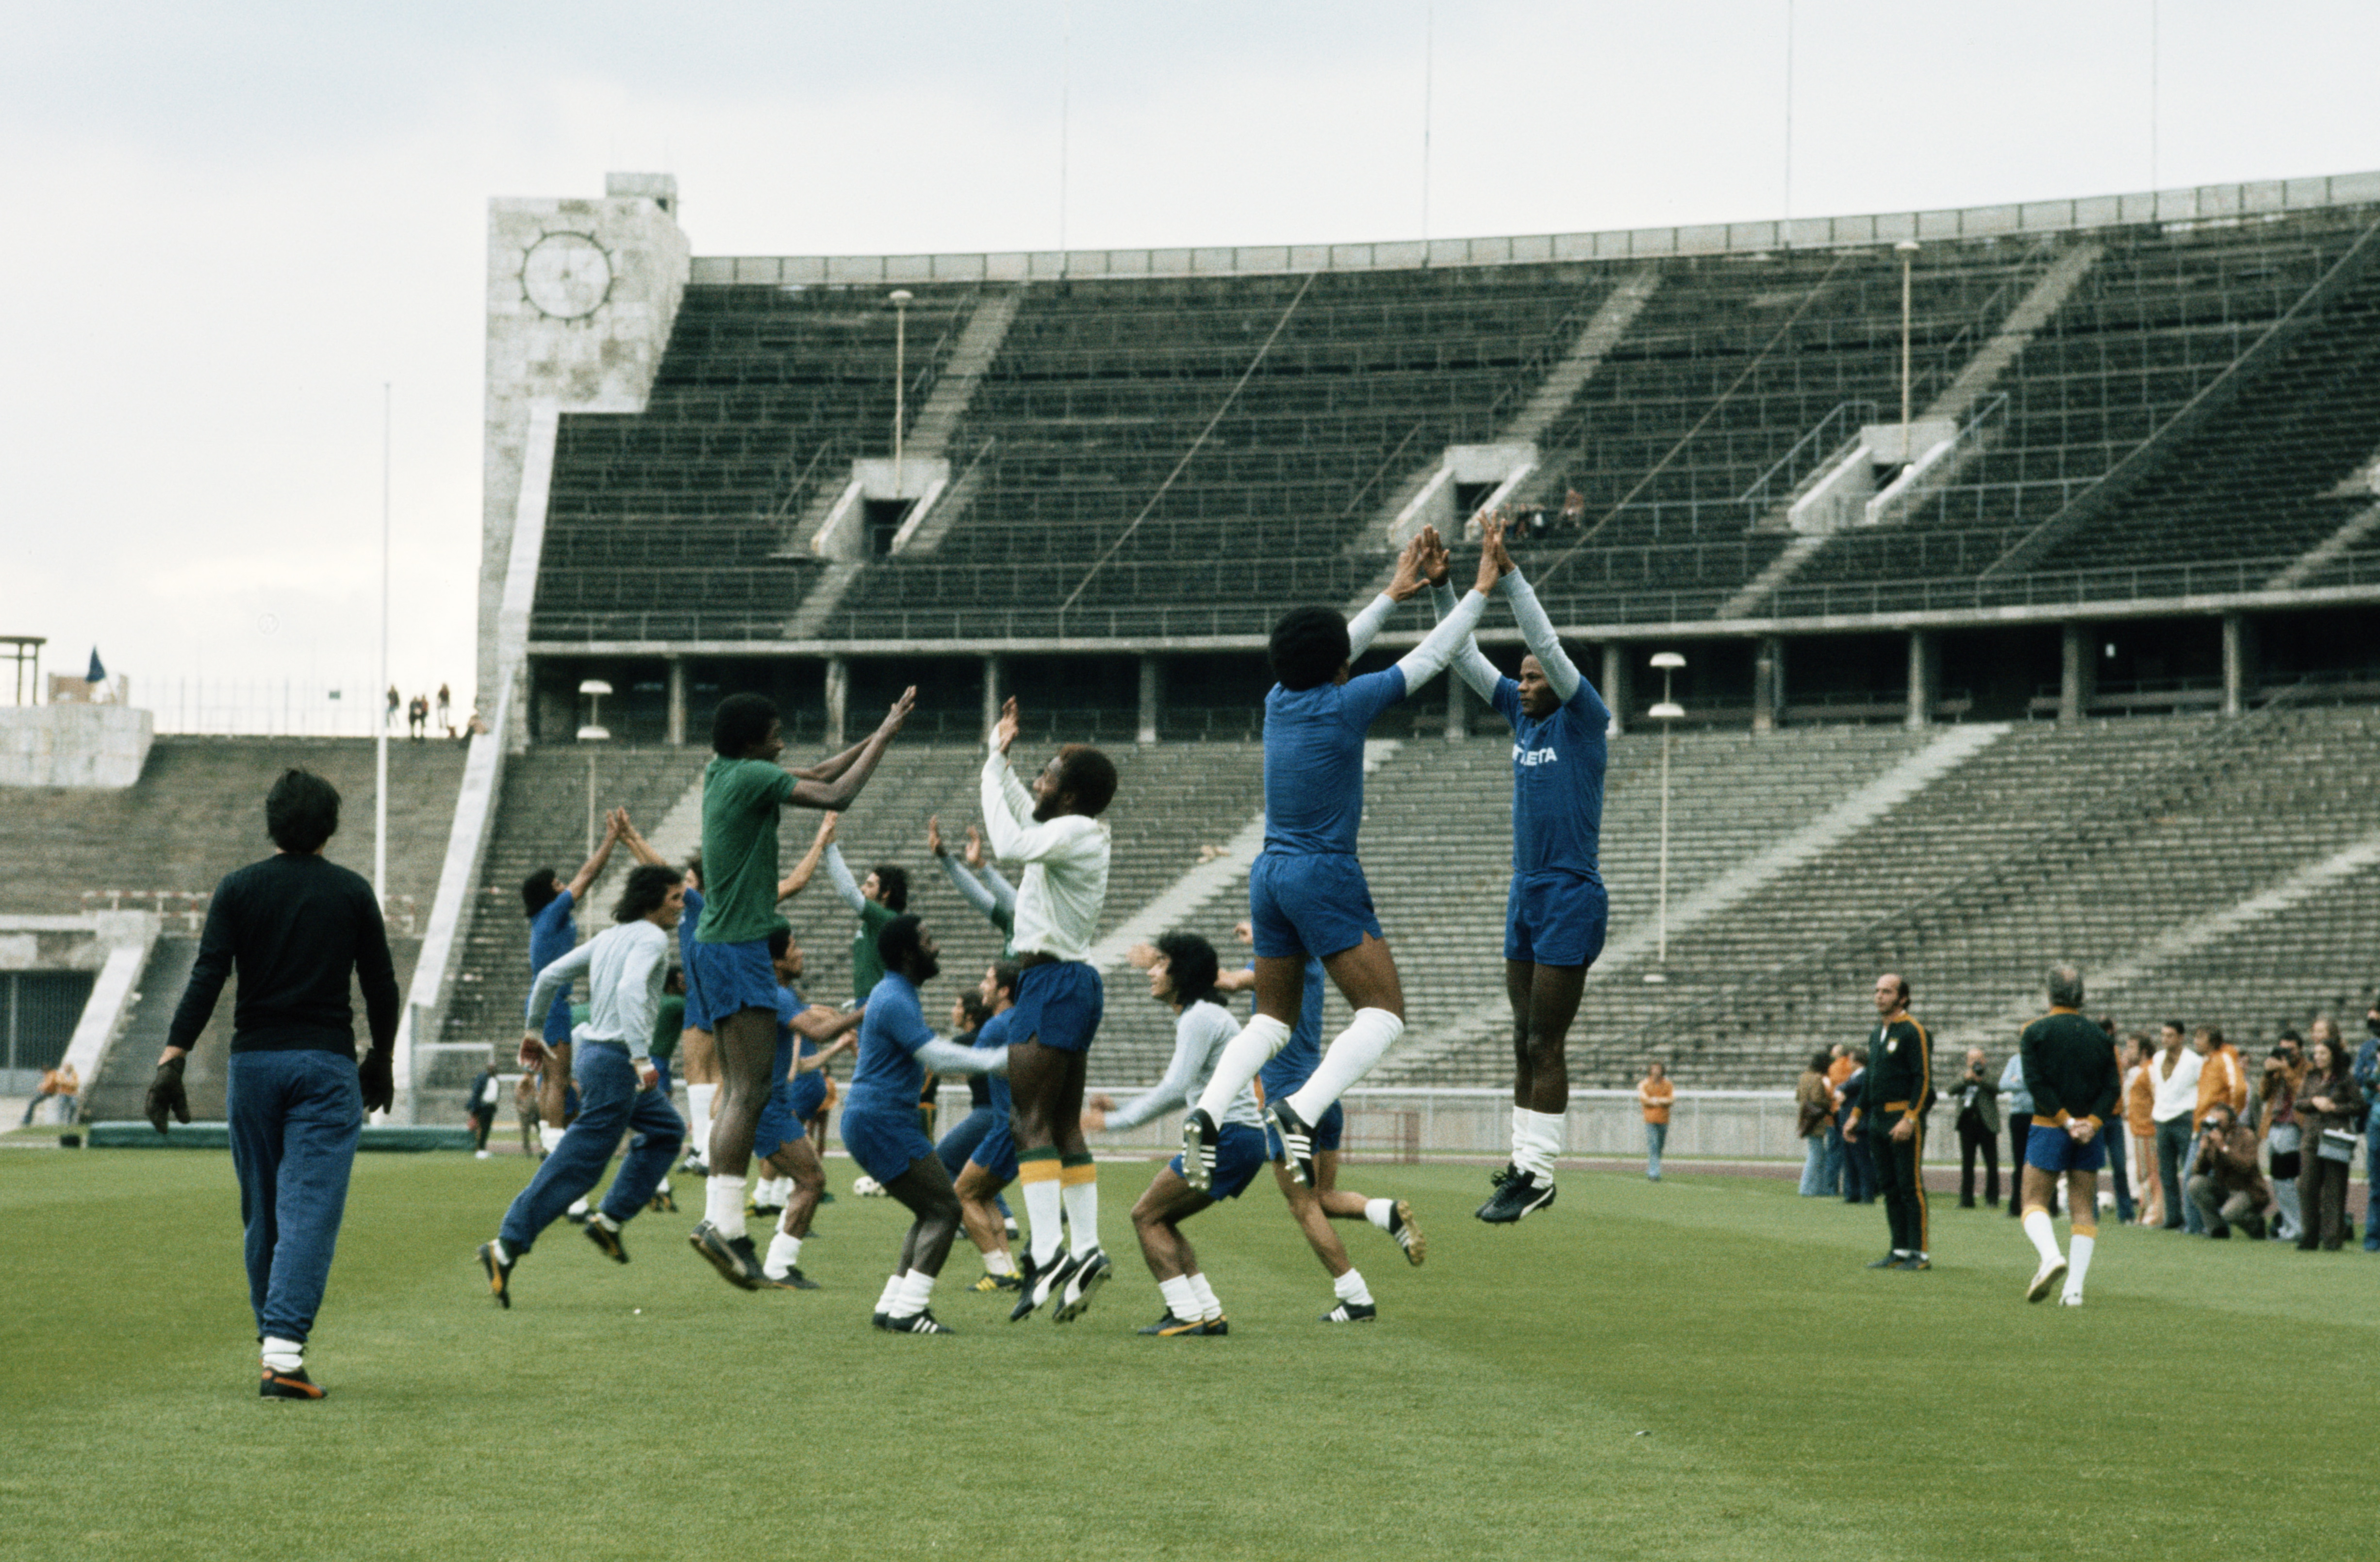 Mario Zagallo the coach for Brazil and the team trainer Admillo Chirol watch as Jairzinho and Marco Antonio in the foreground with the rest of the squad in training before the start of the 1974 FIFA World Cup in June 1974 at the Berlin Olympic Stadium in